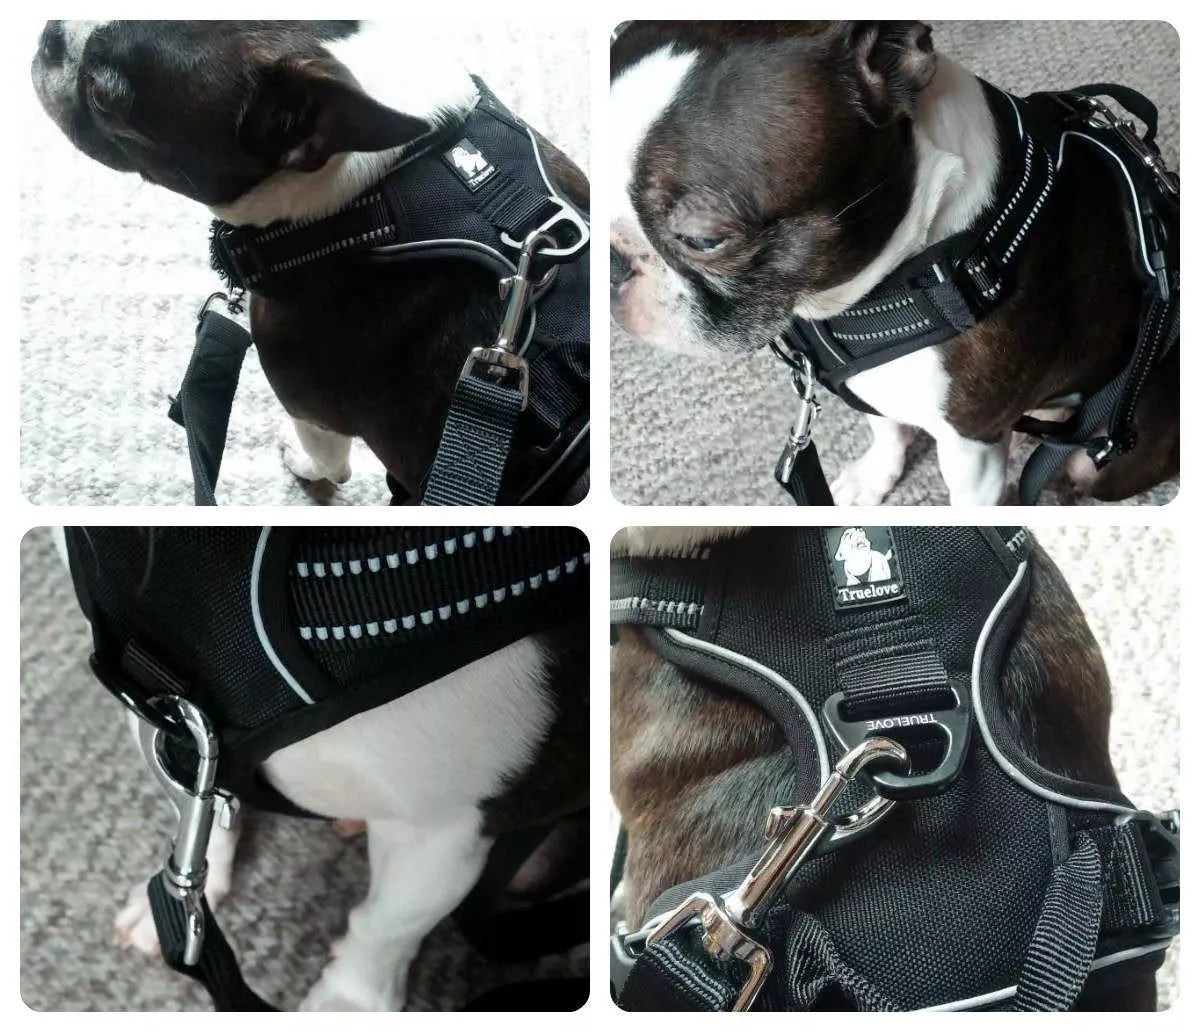 How to attach a double ended dog lead to a harness